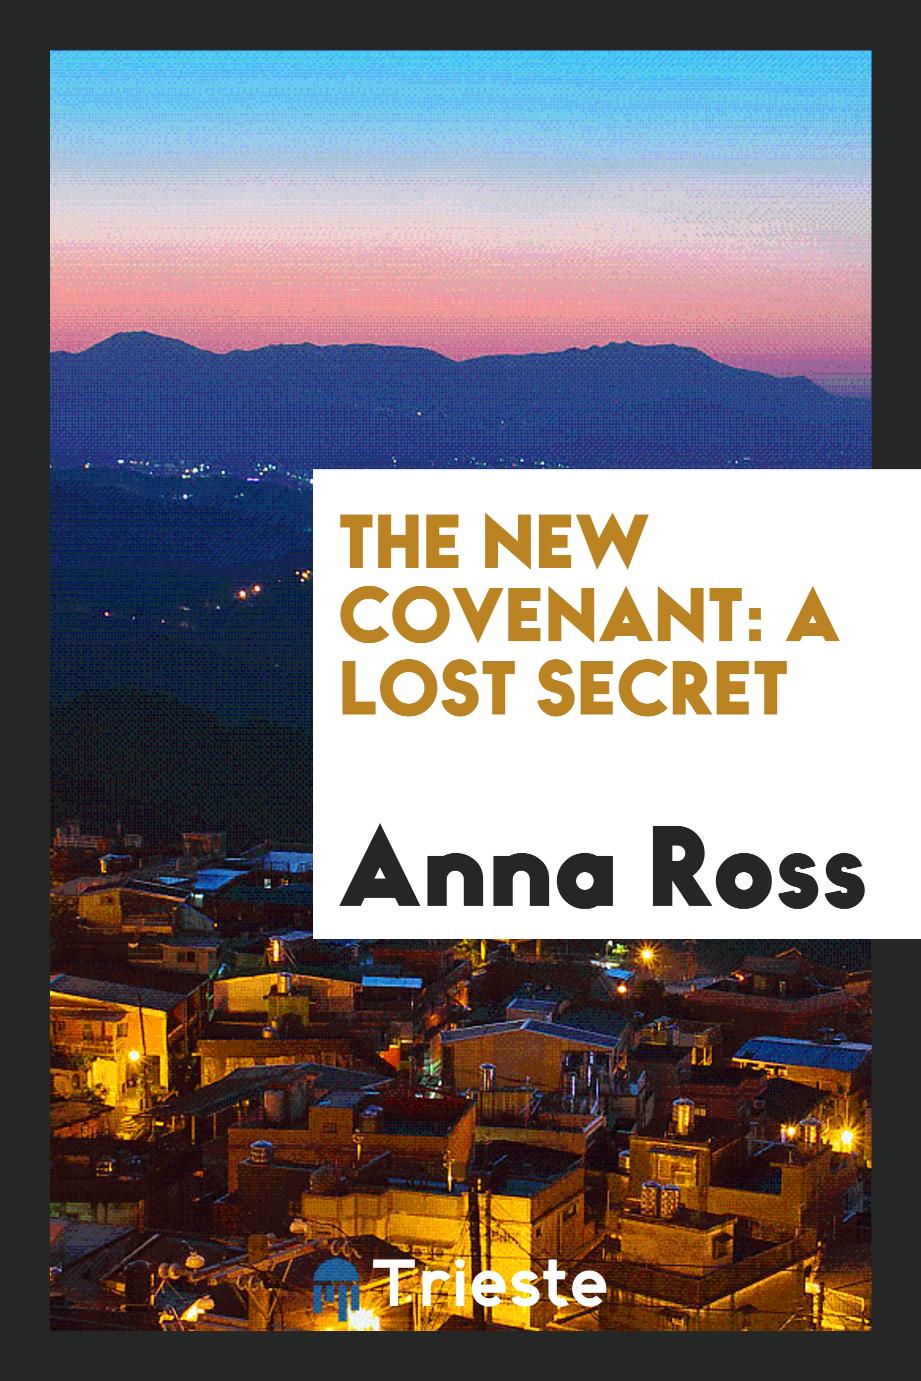 The new covenant: a lost secret